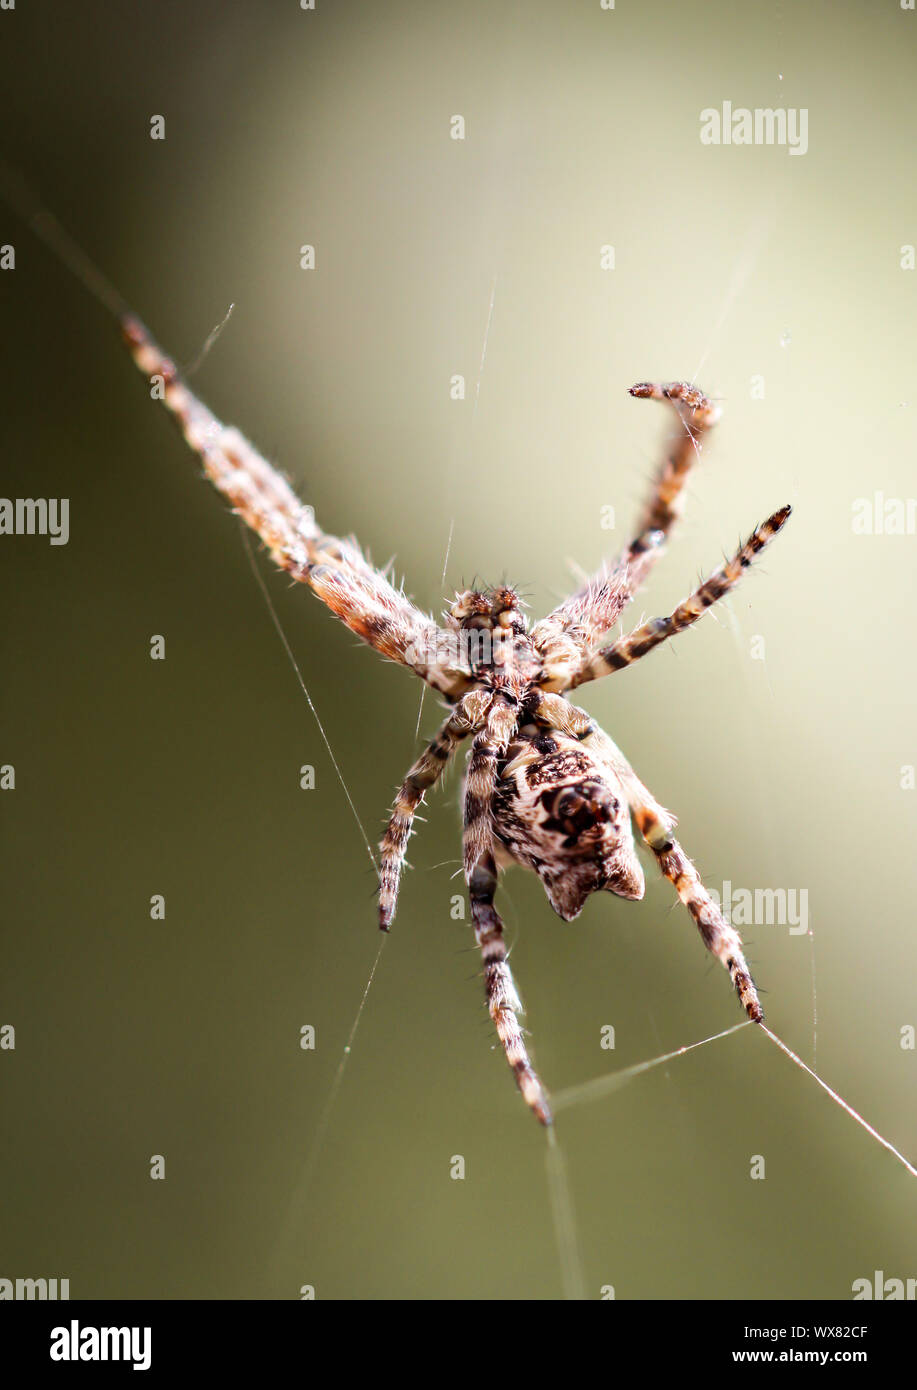 Detail of a spider Stock Photo